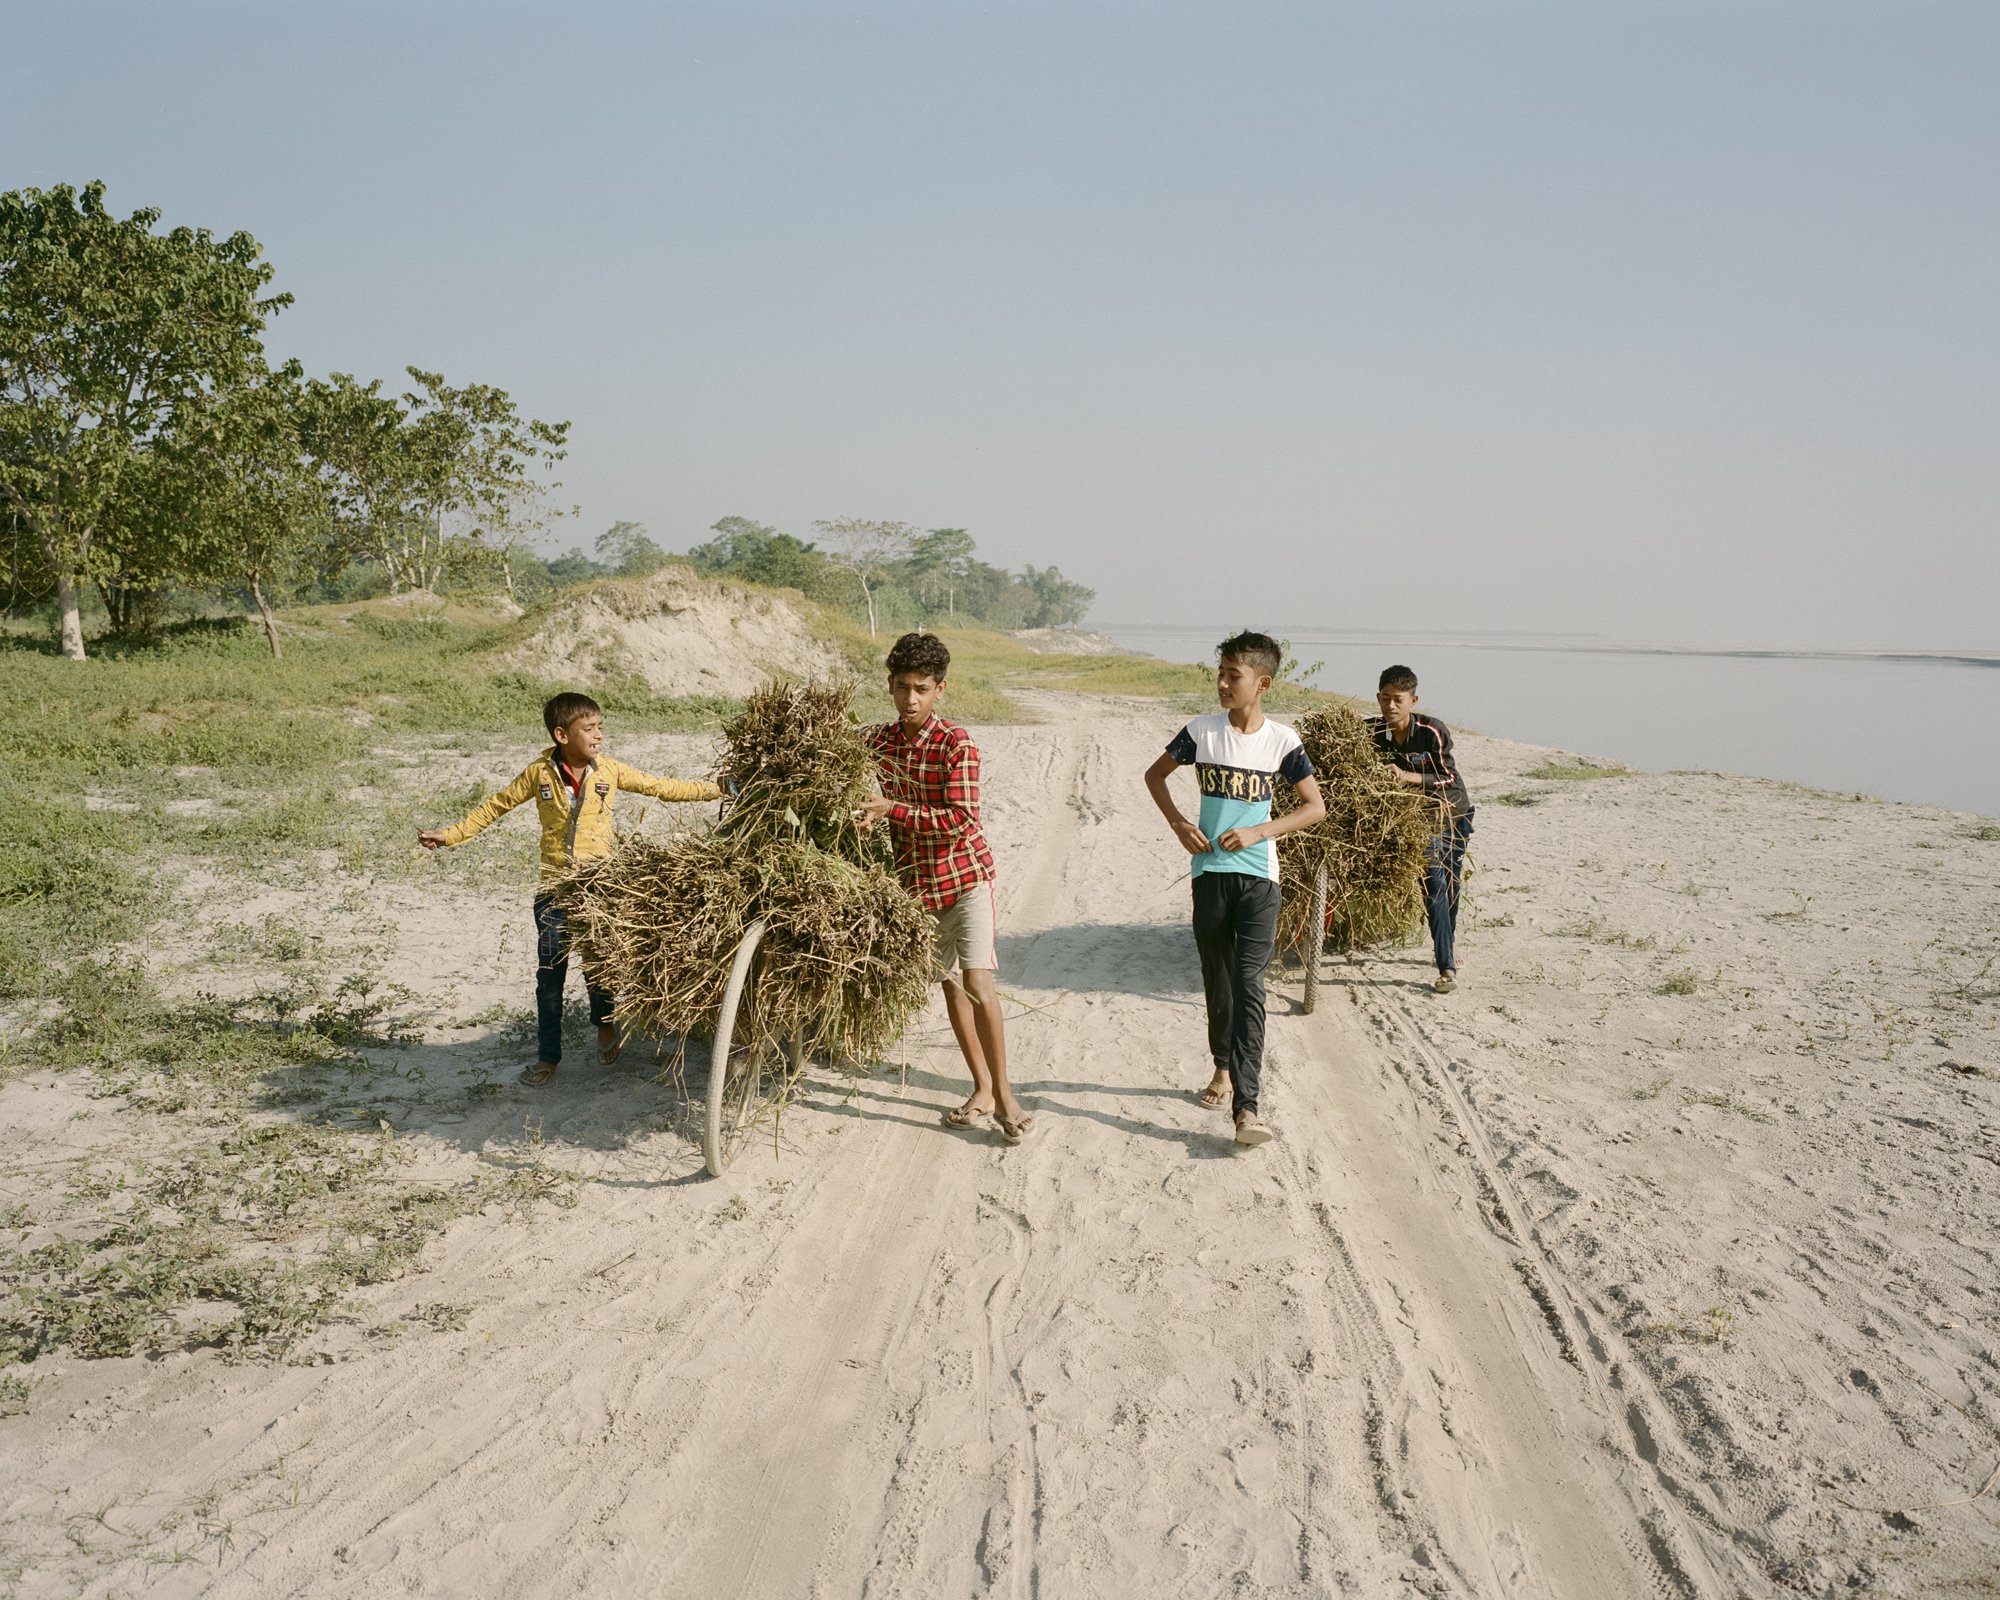   Gitartha Chamuah and her brothers carry home the straw needed to burn the clay, which was recently collected from the vegetation in the floodplain.    Salmora, Majuli, India — 2021  